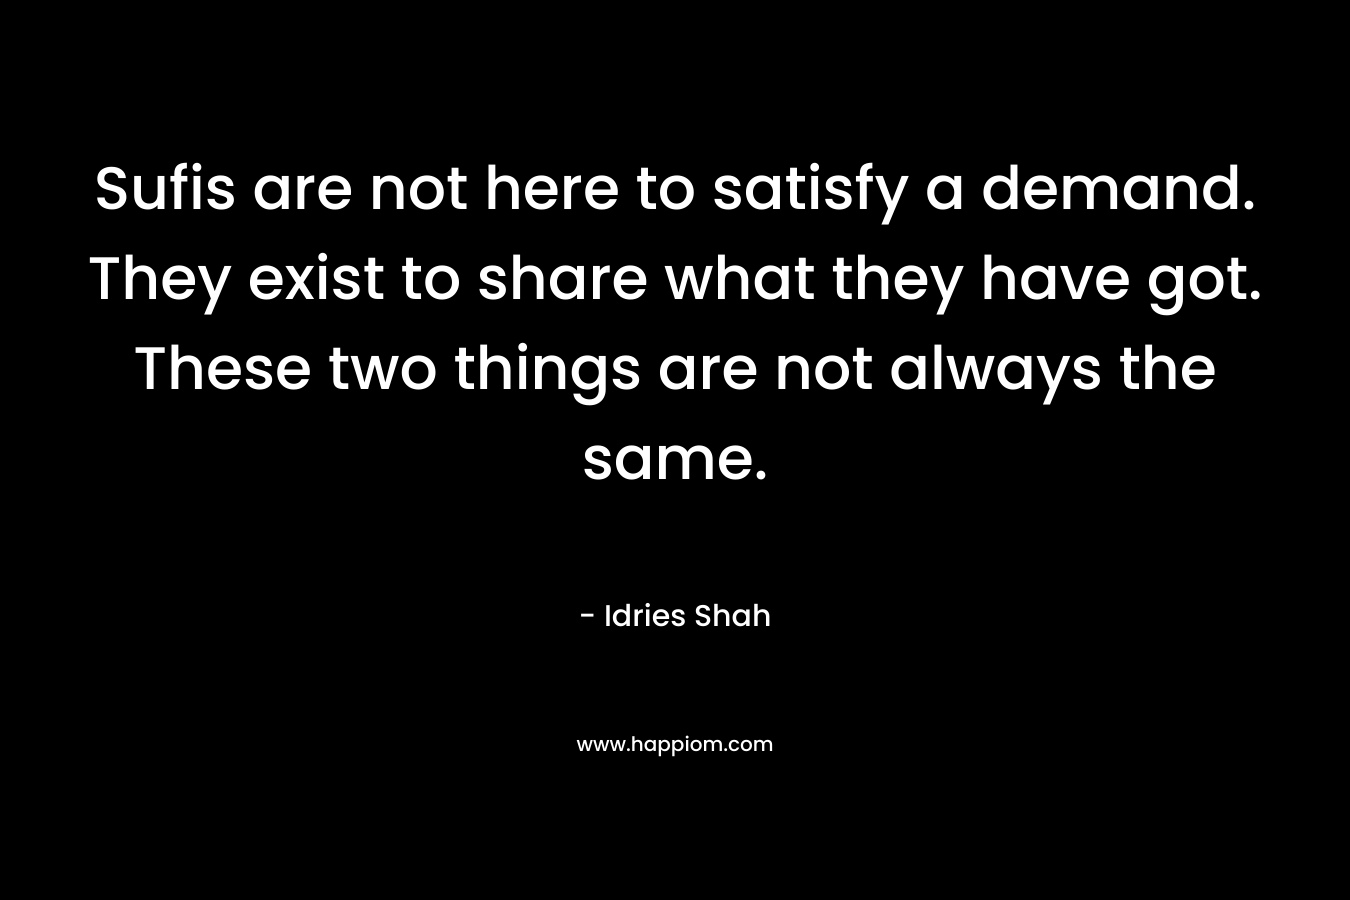 Sufis are not here to satisfy a demand. They exist to share what they have got. These two things are not always the same. – Idries Shah